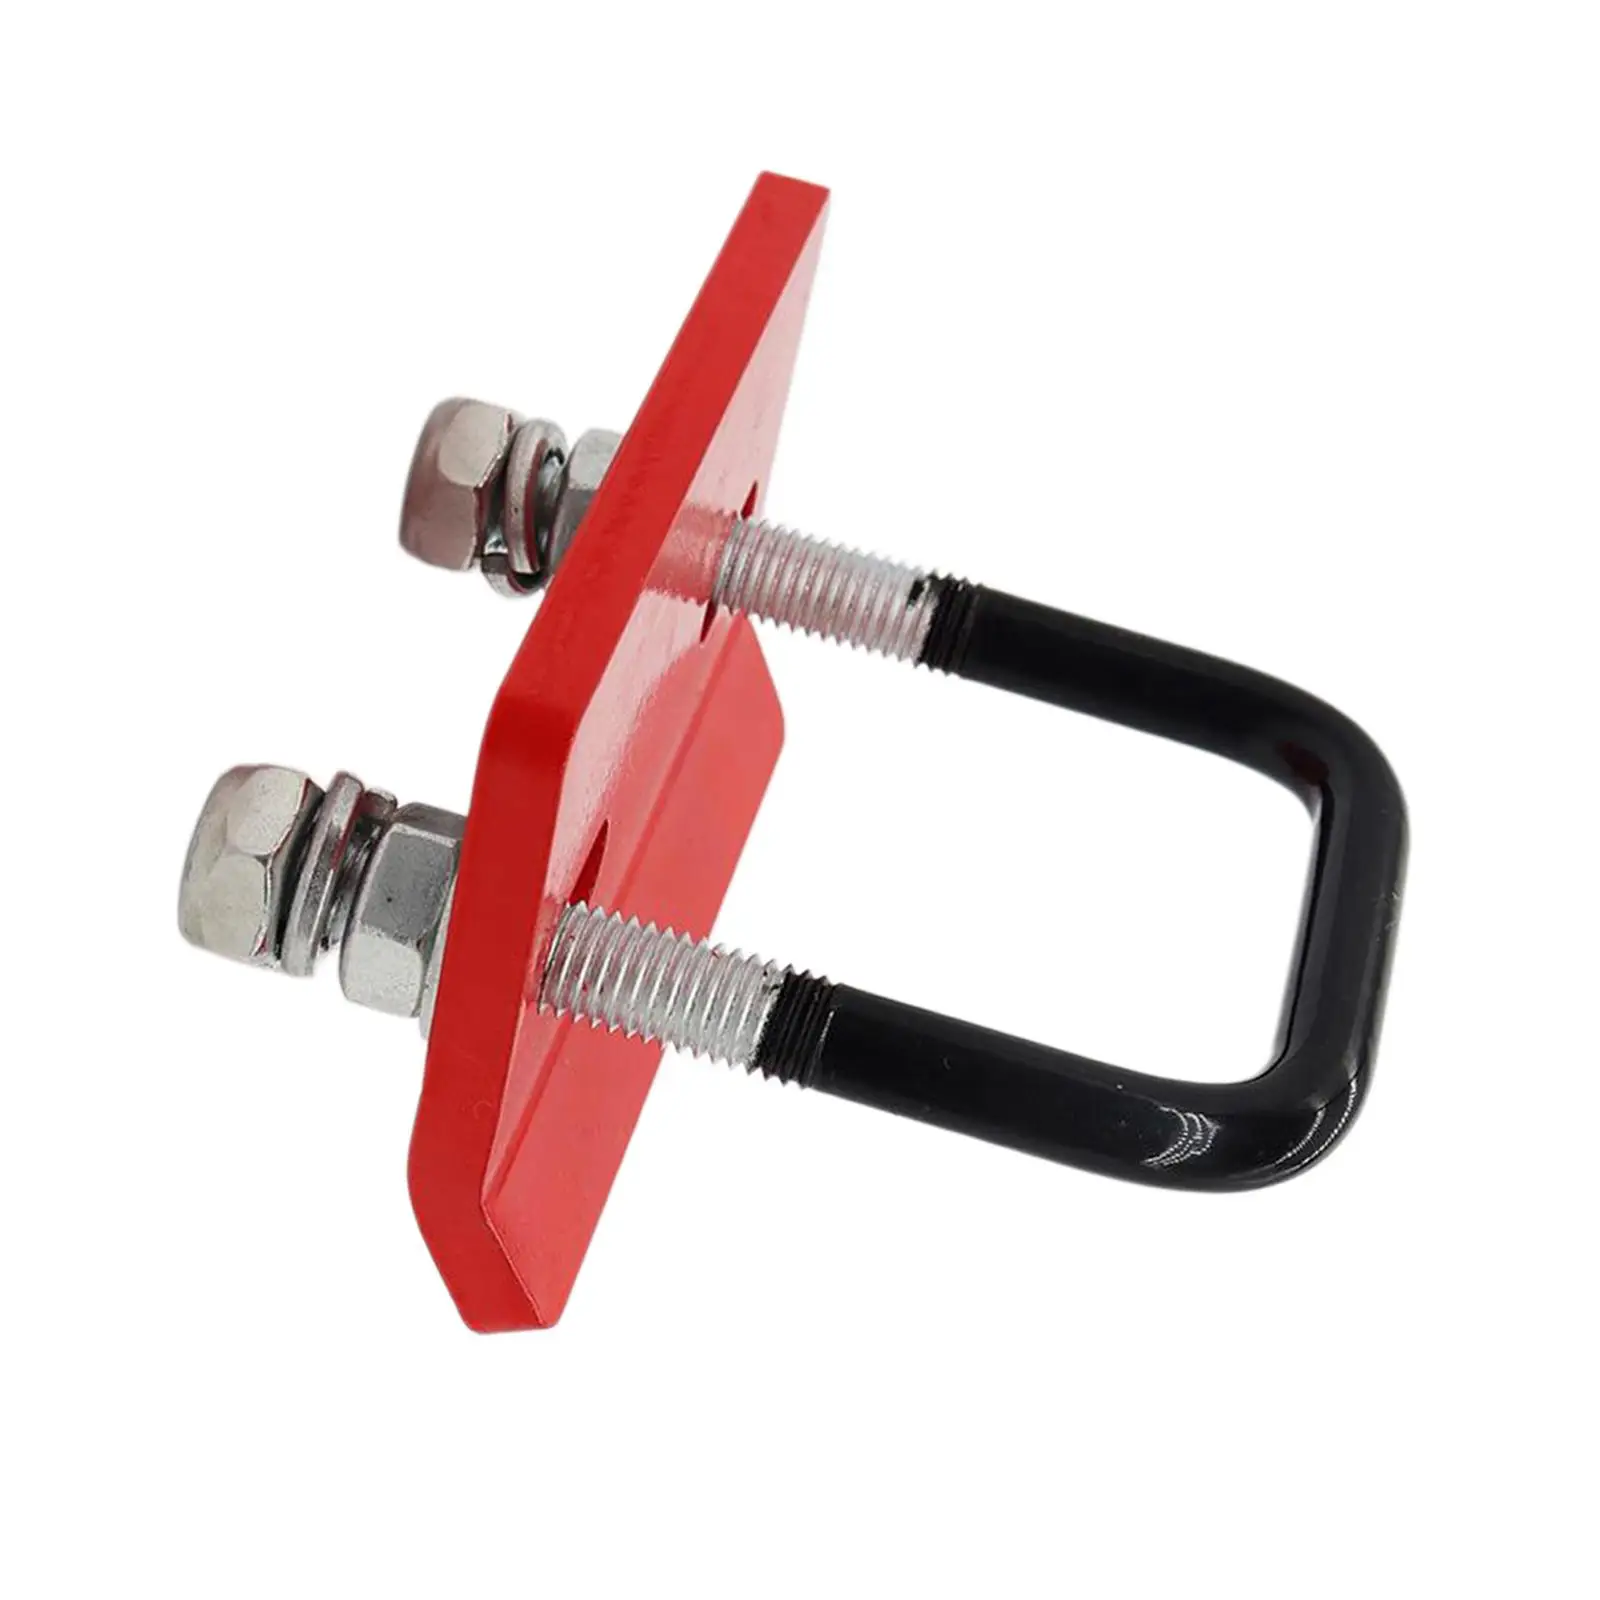 Alloy Steel Hitch Tightener Universal Protective Anti Rust Coating Lock Down Tow Clamp for Trailer Hitch Tray Bike Rack